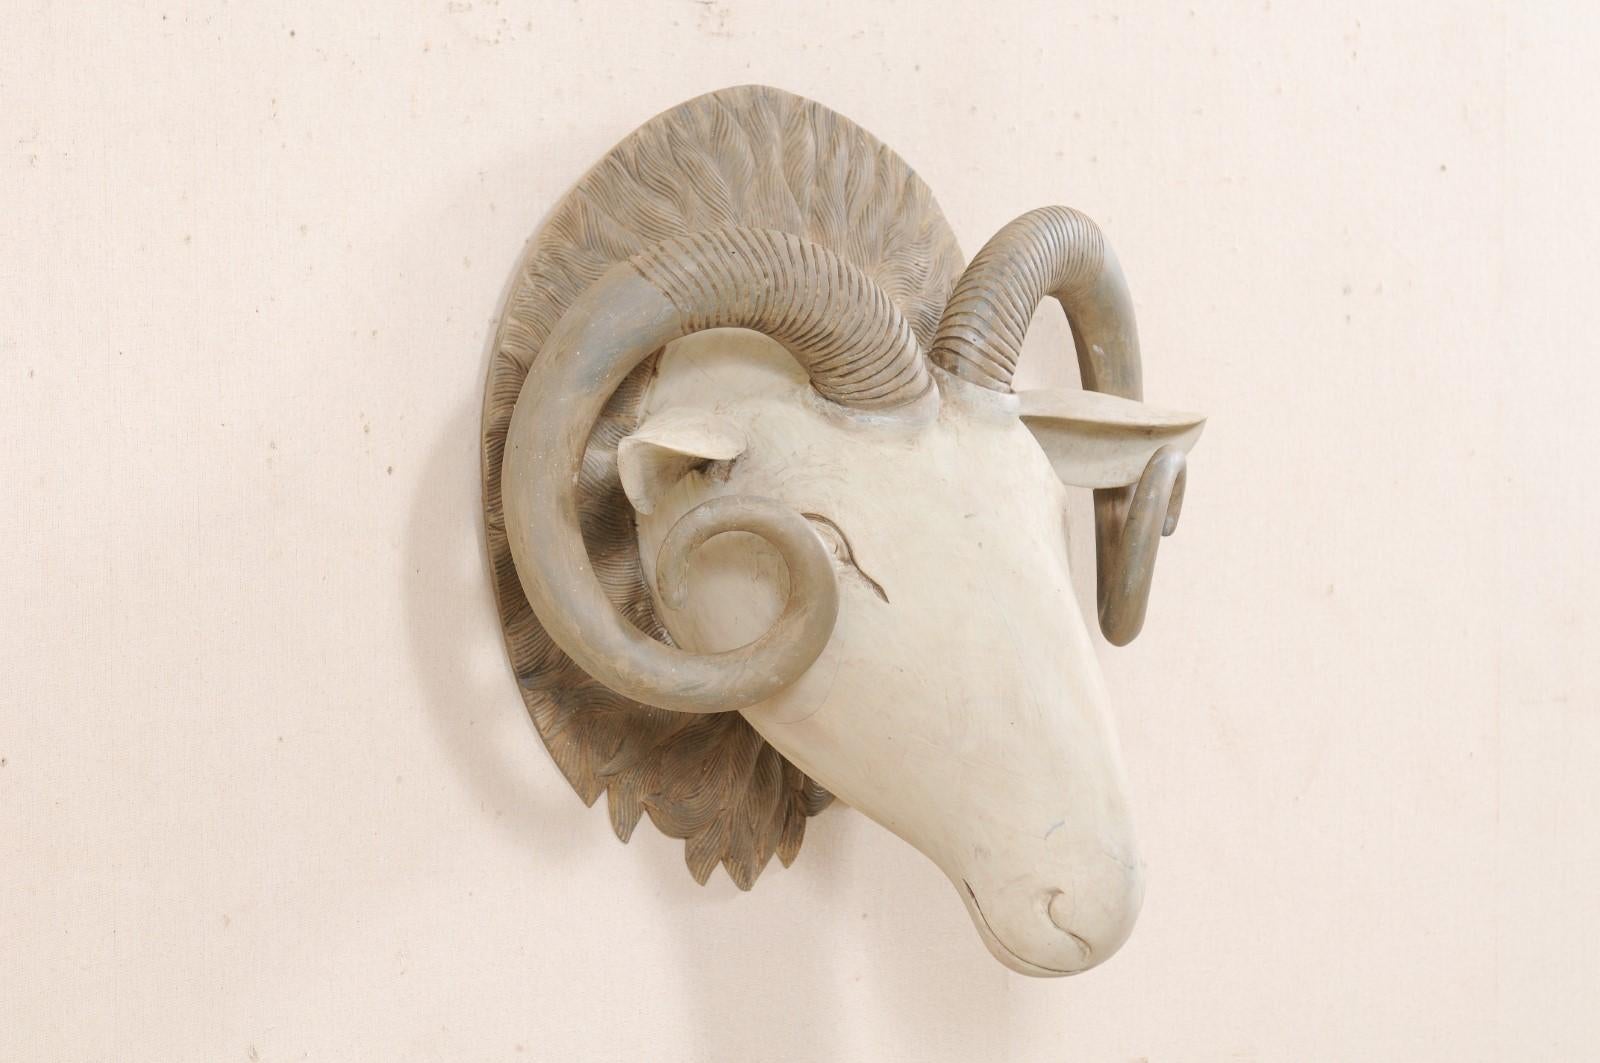 American Hand Carved and Painted Wood Ram's Head Wall Ornament